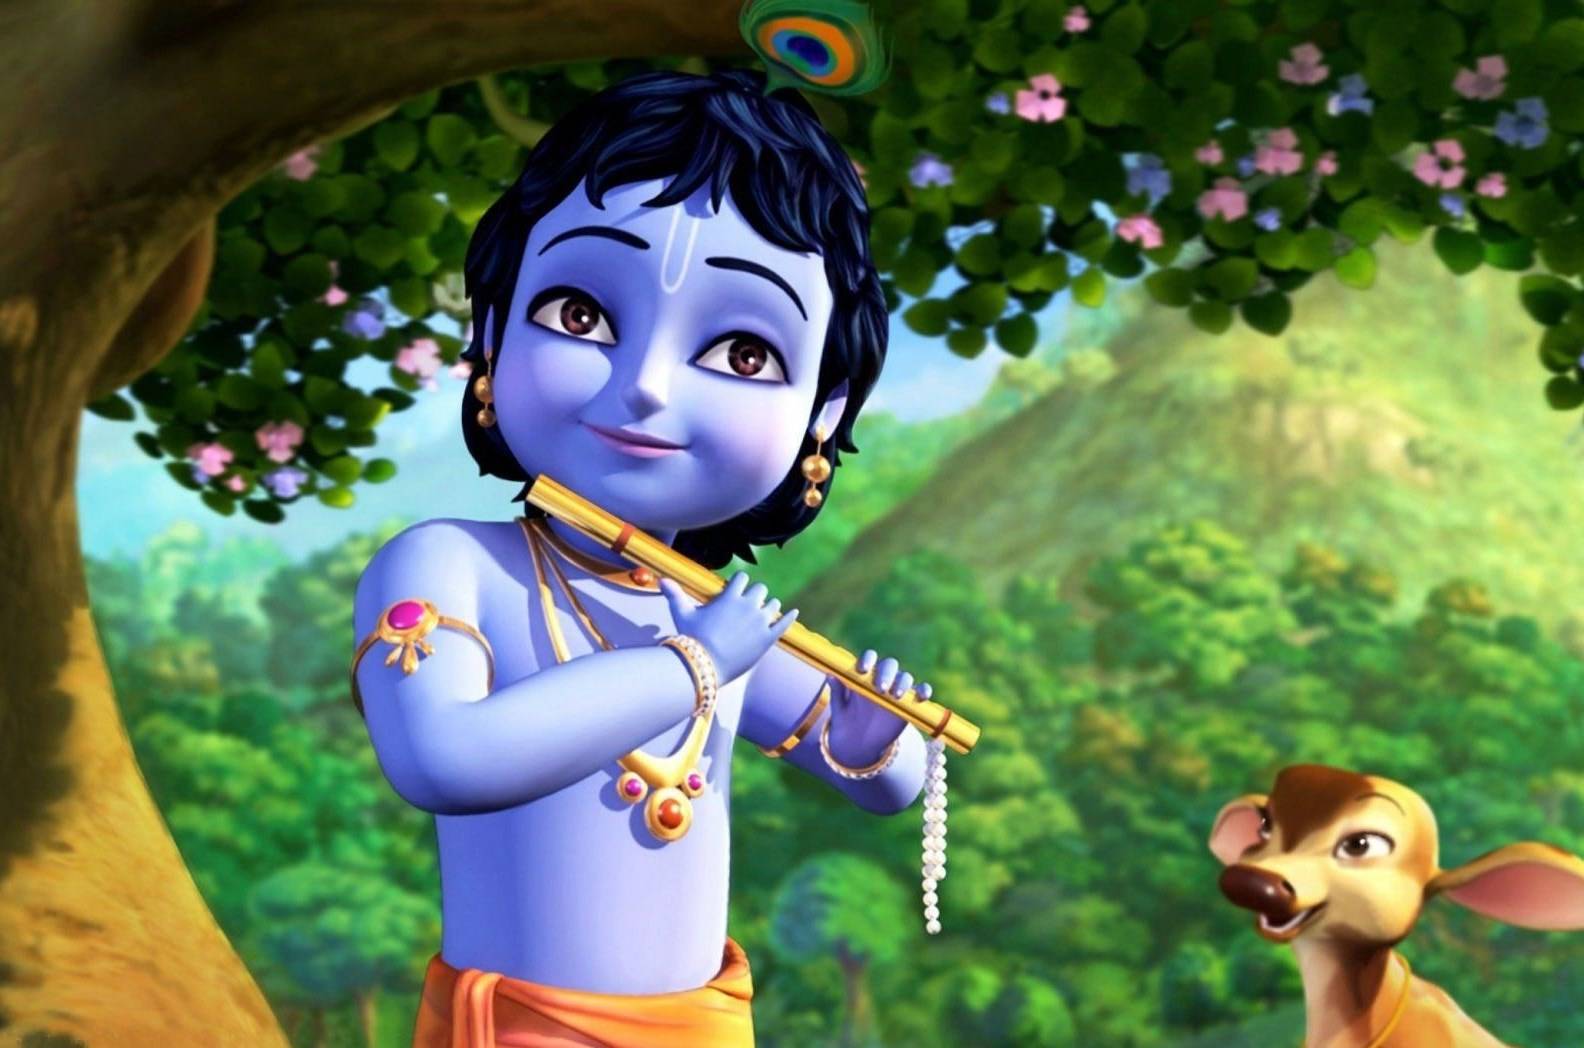 Lord Krishna 3D Hd Wallpapers 1080P Free Download : Enjoy and share